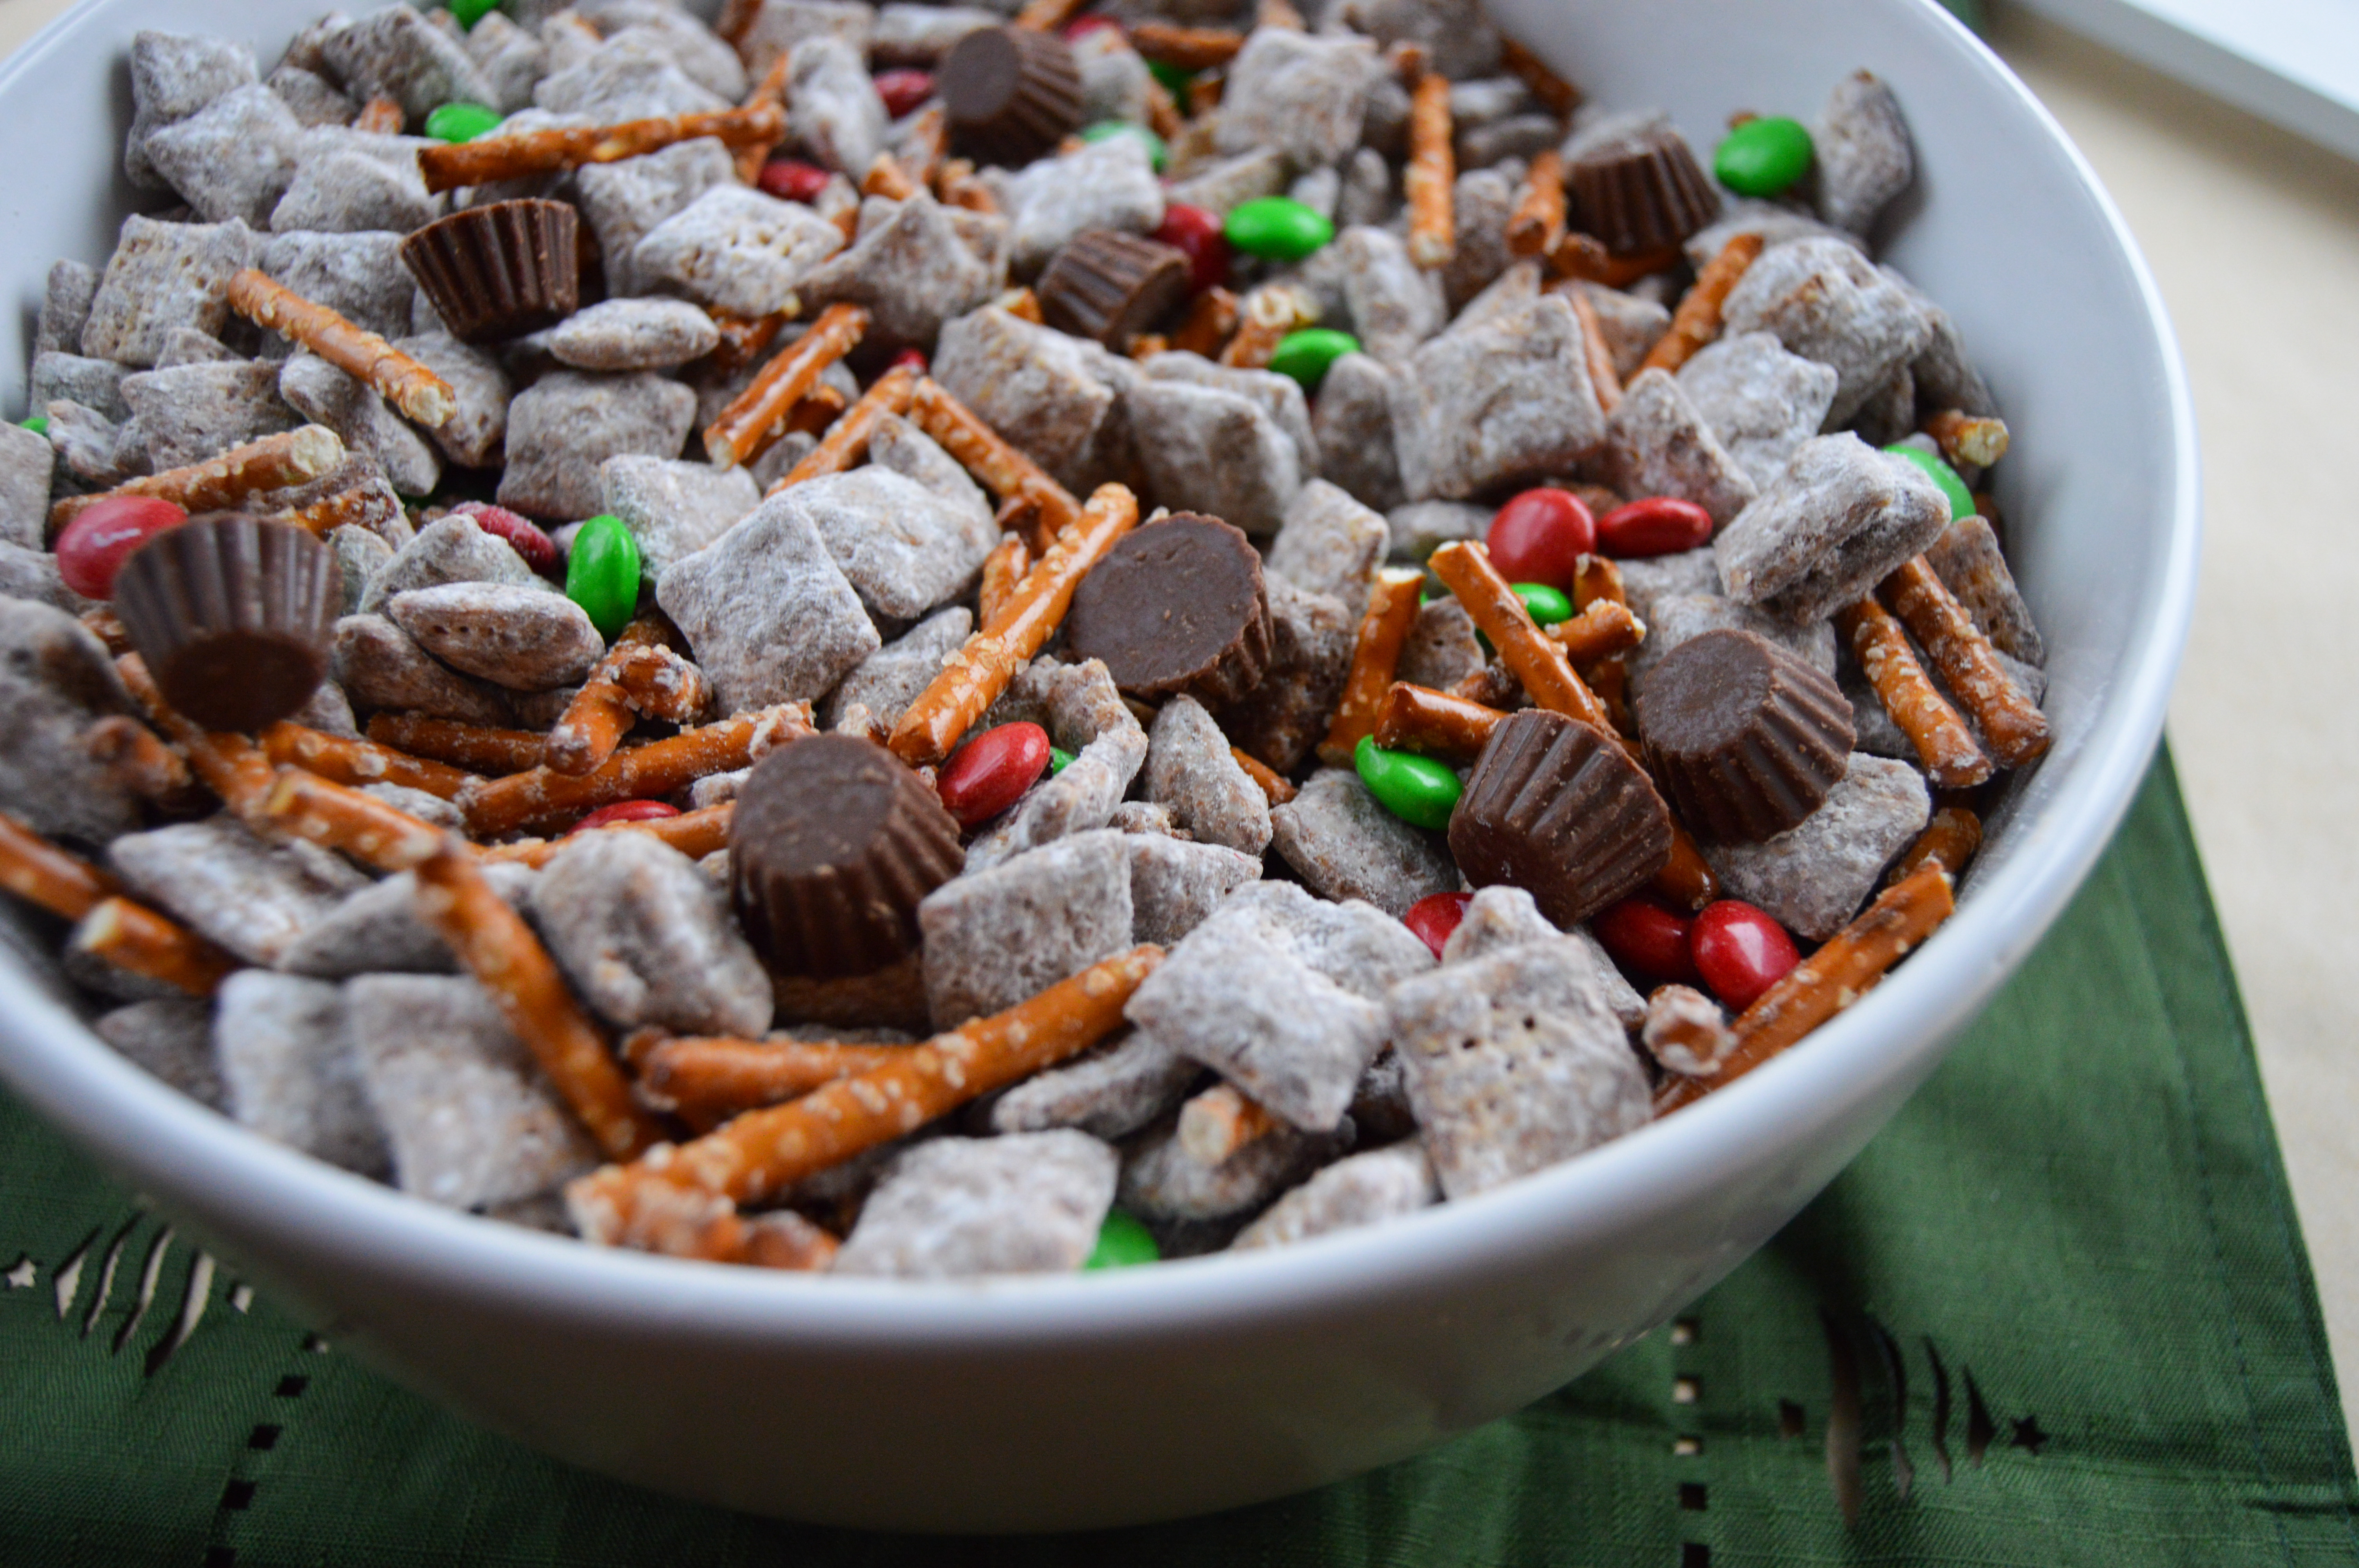 Reindeer Chow Recipe and Gifting